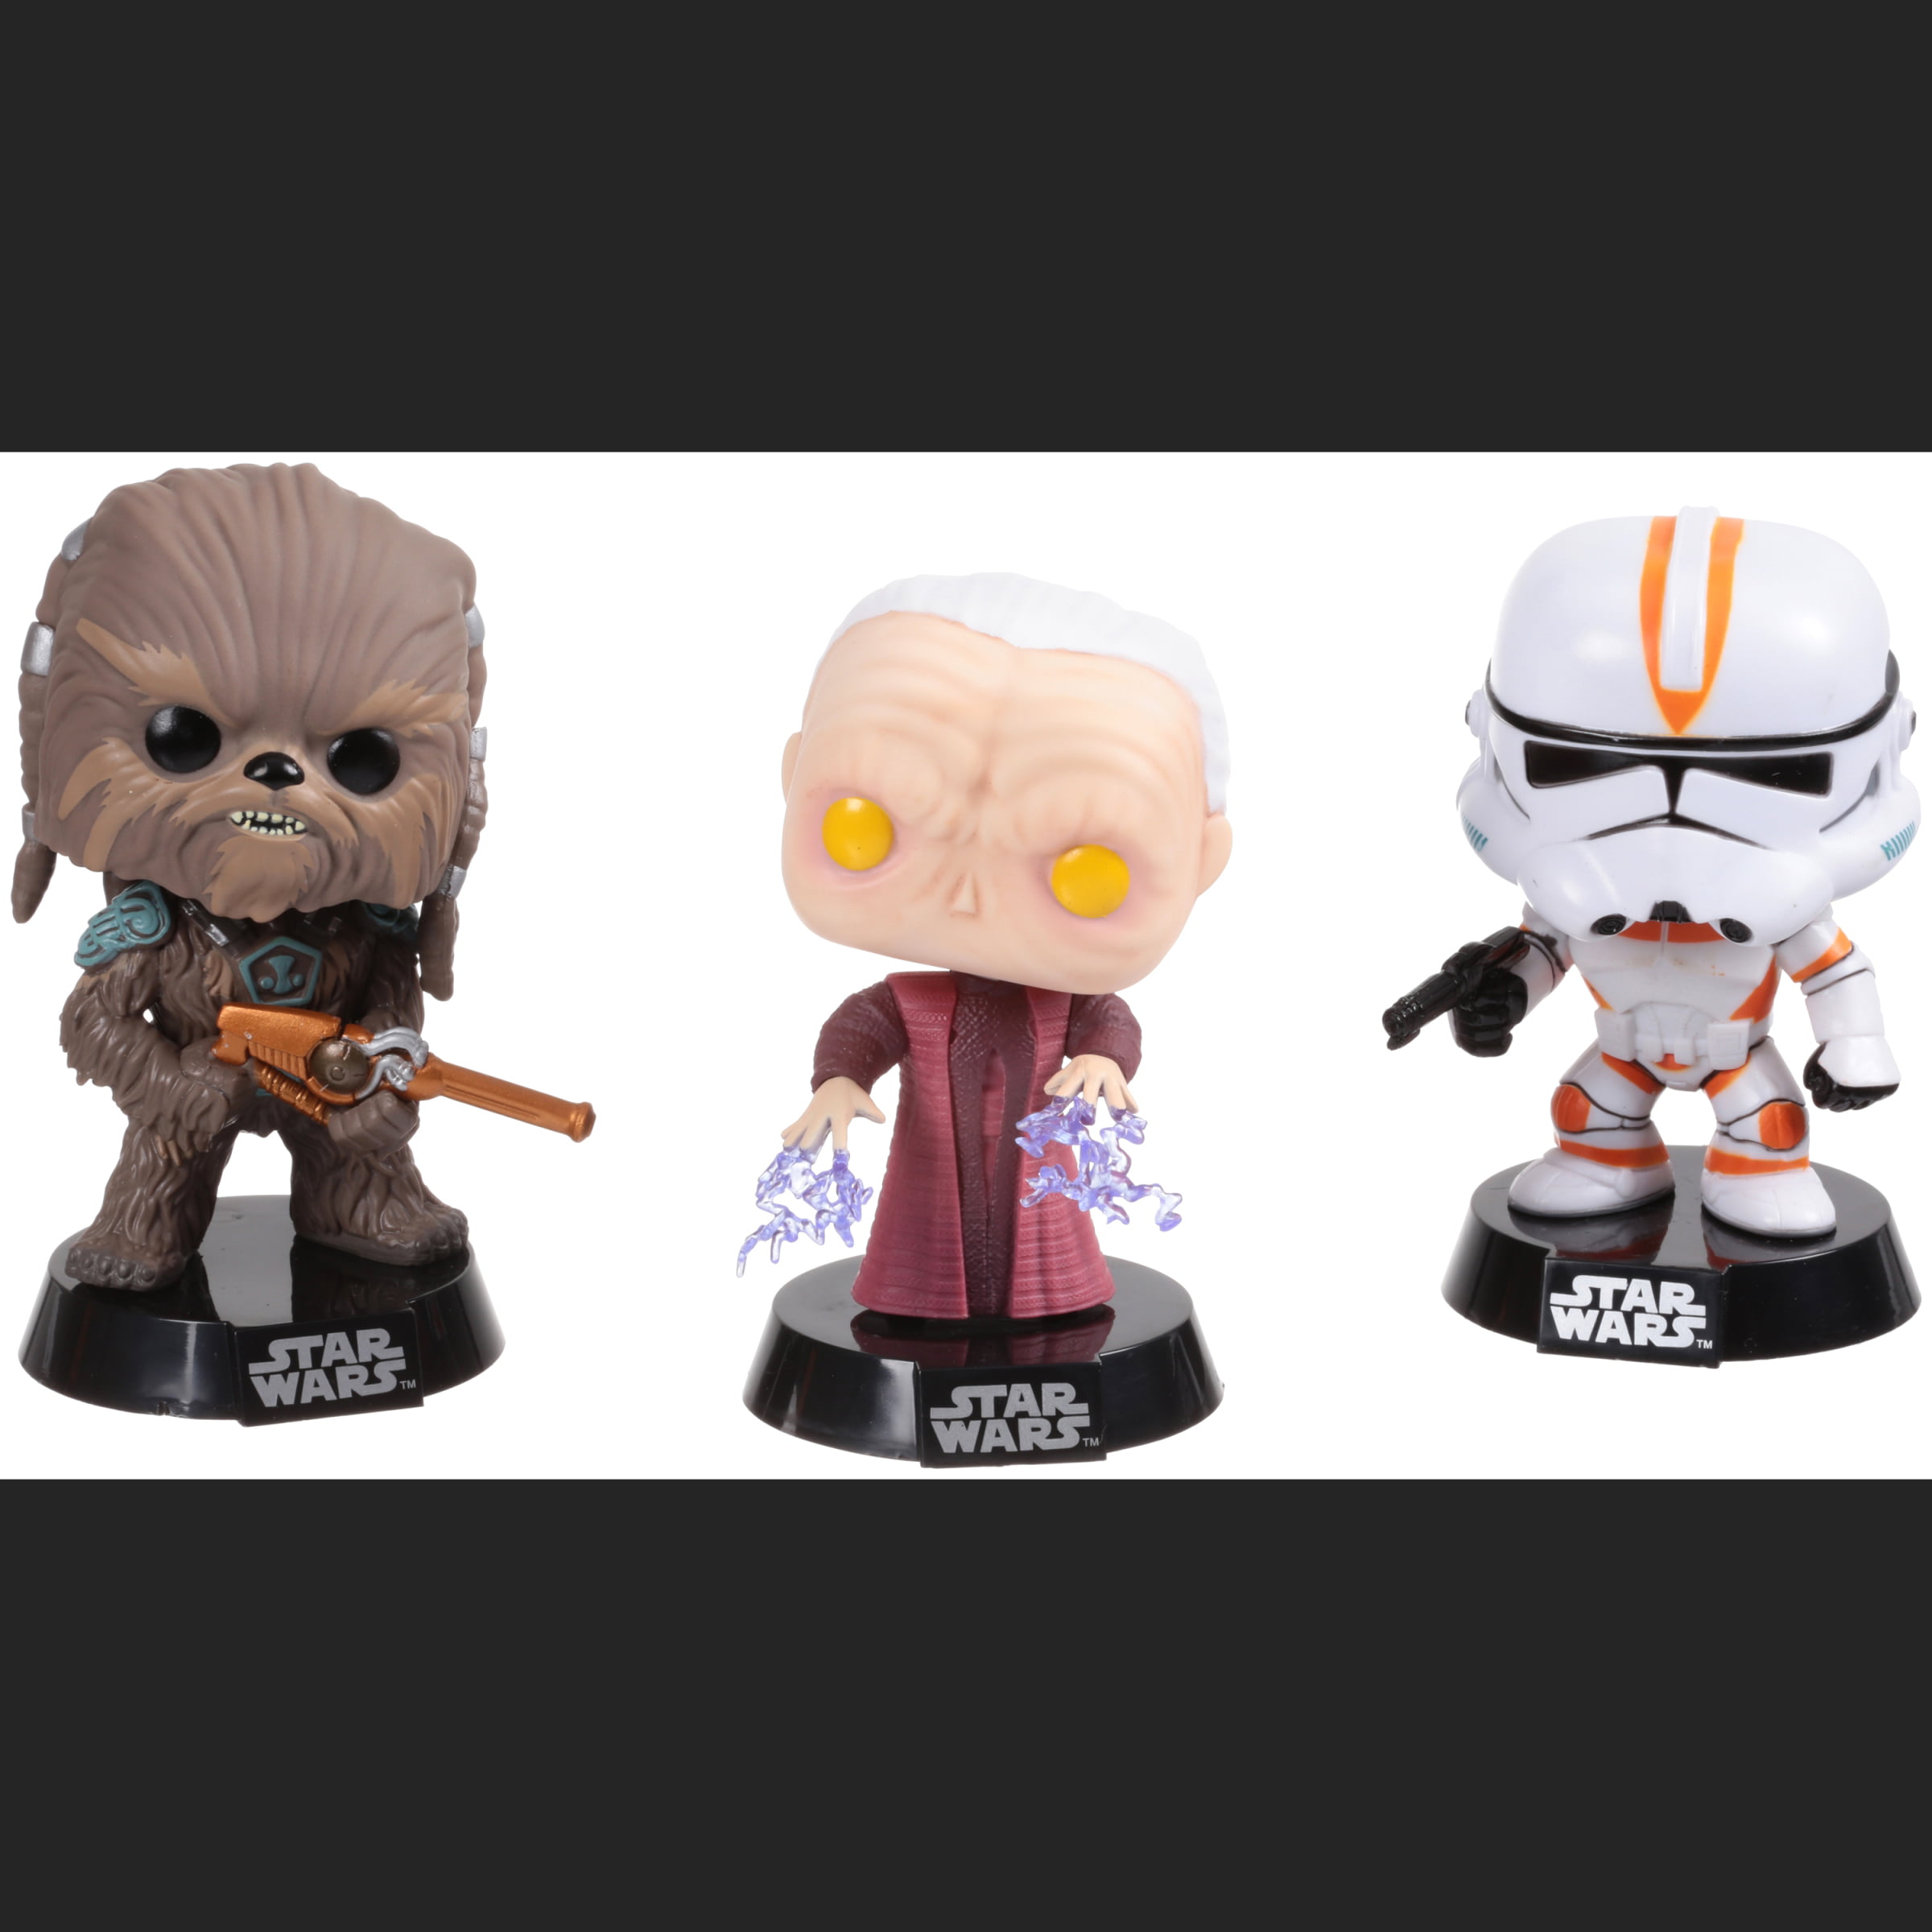 Unhooded Emperor ONLY! 1 Box Protector for Walmart Star Wars 3 Packs  Cantina 